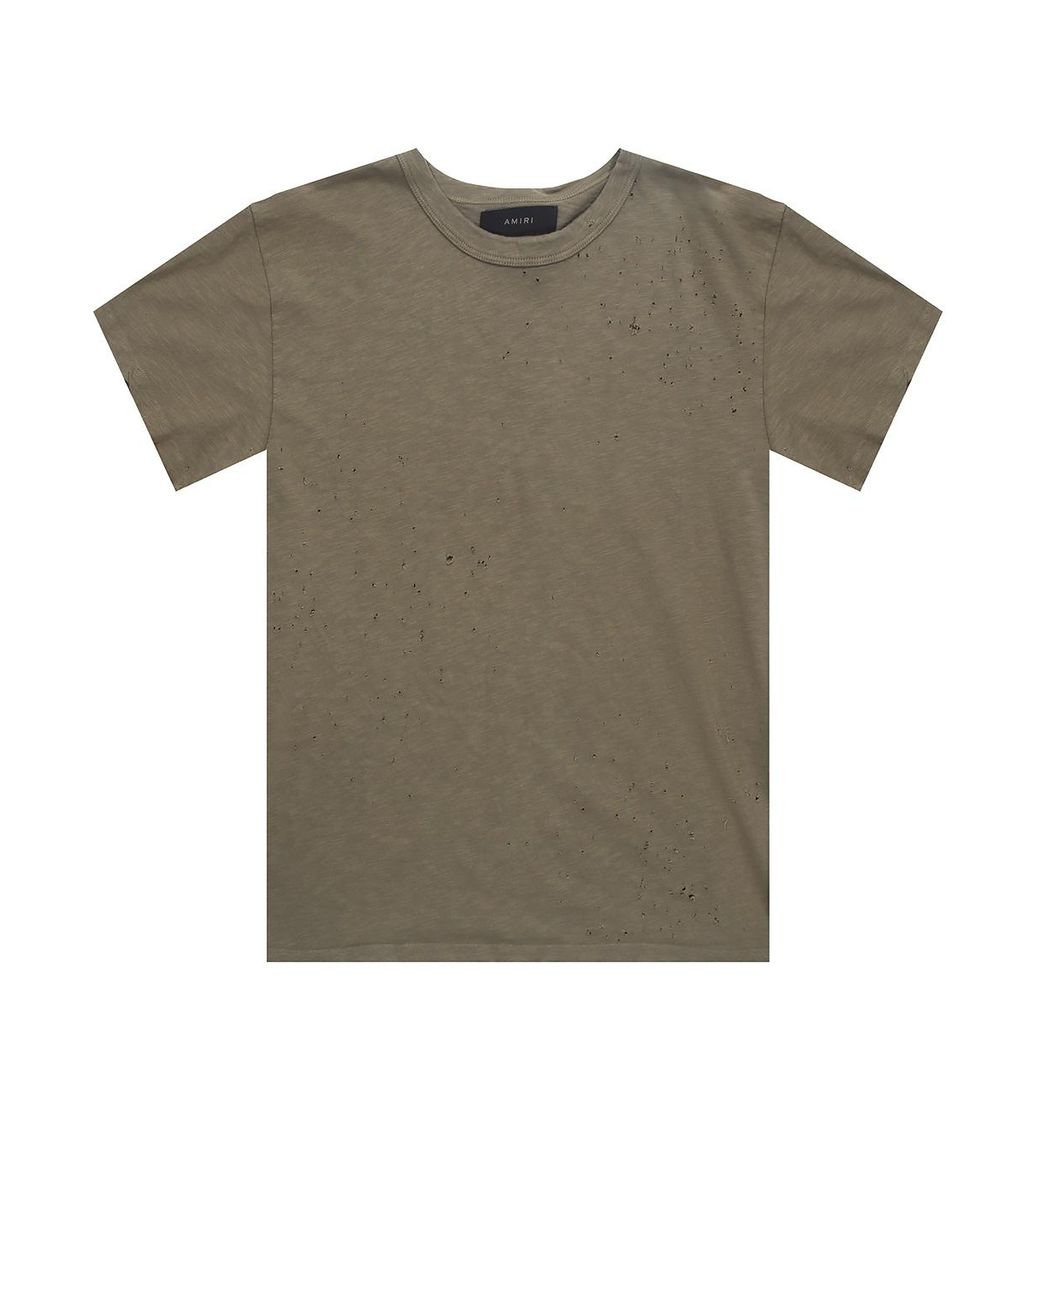 Amiri Cotton Distressed T-shirt in Green for Men - Lyst